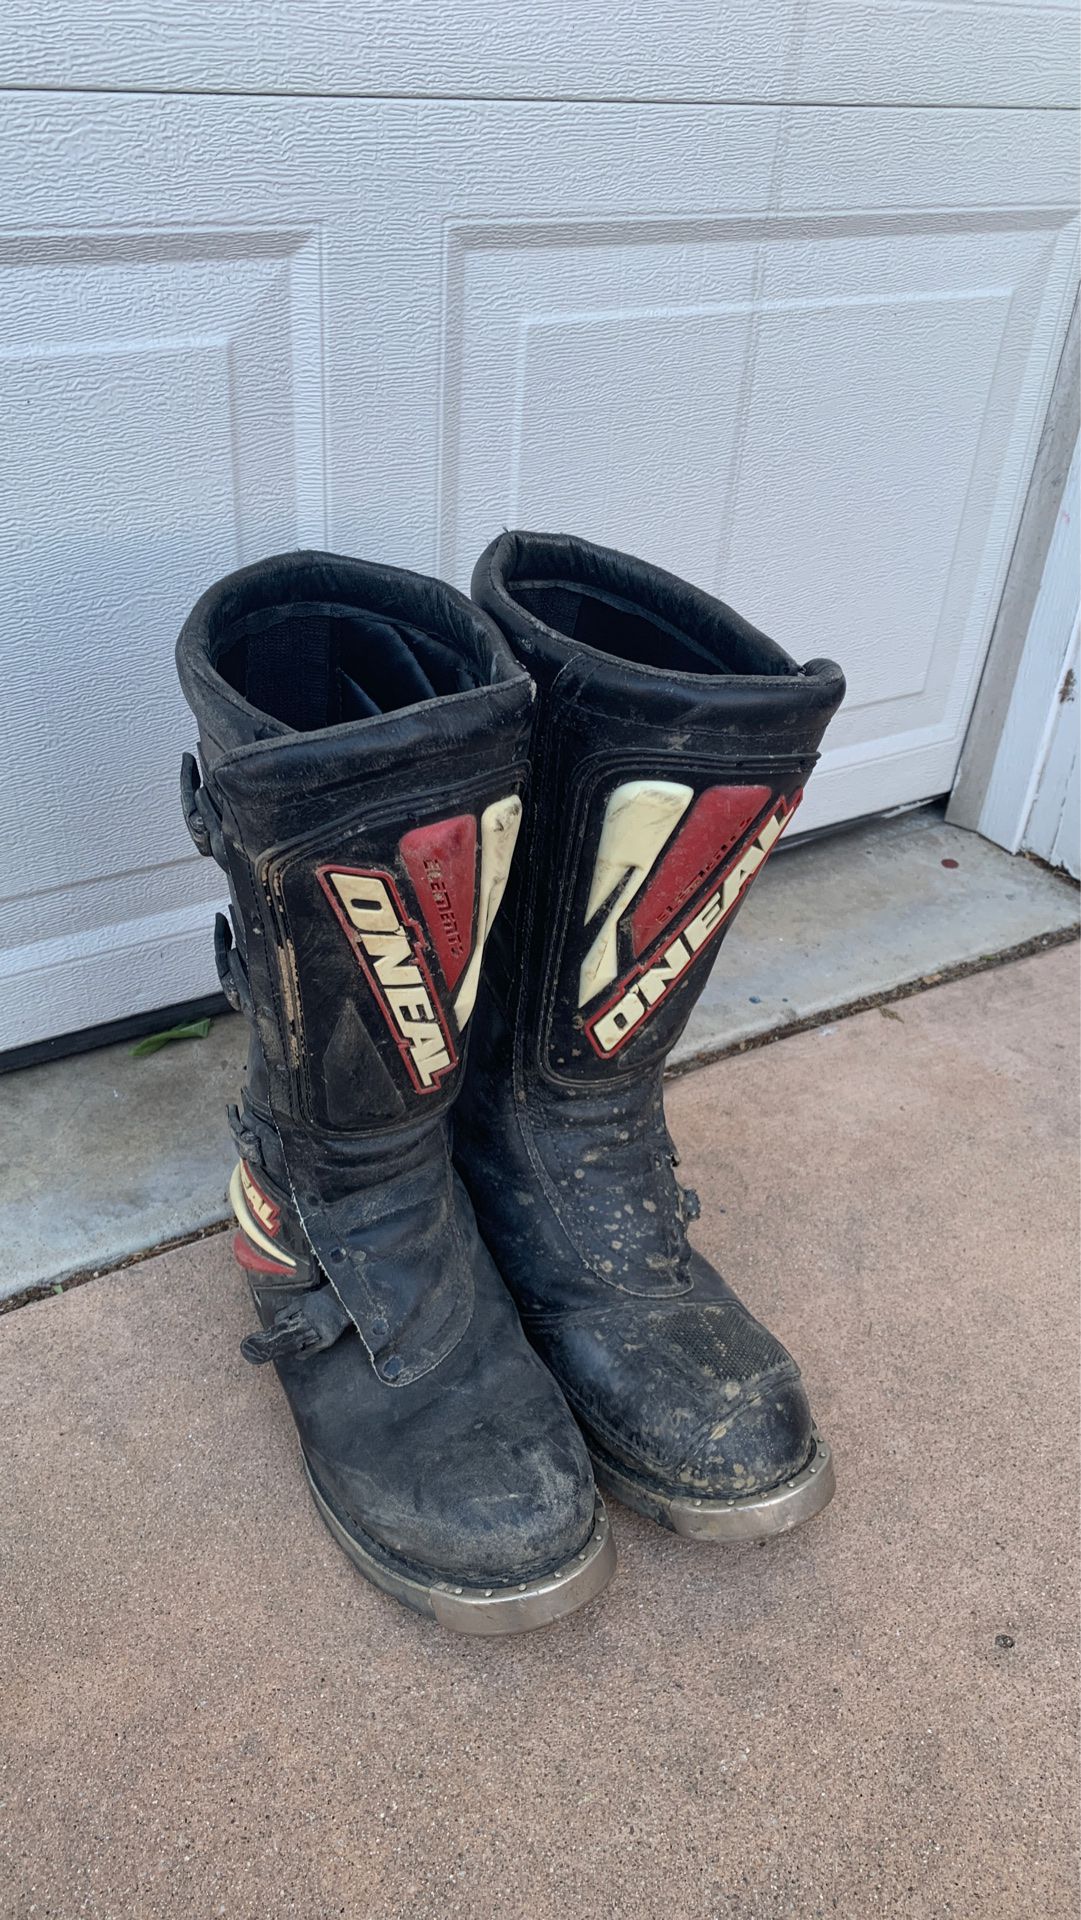 O’Neal riding boots size 12